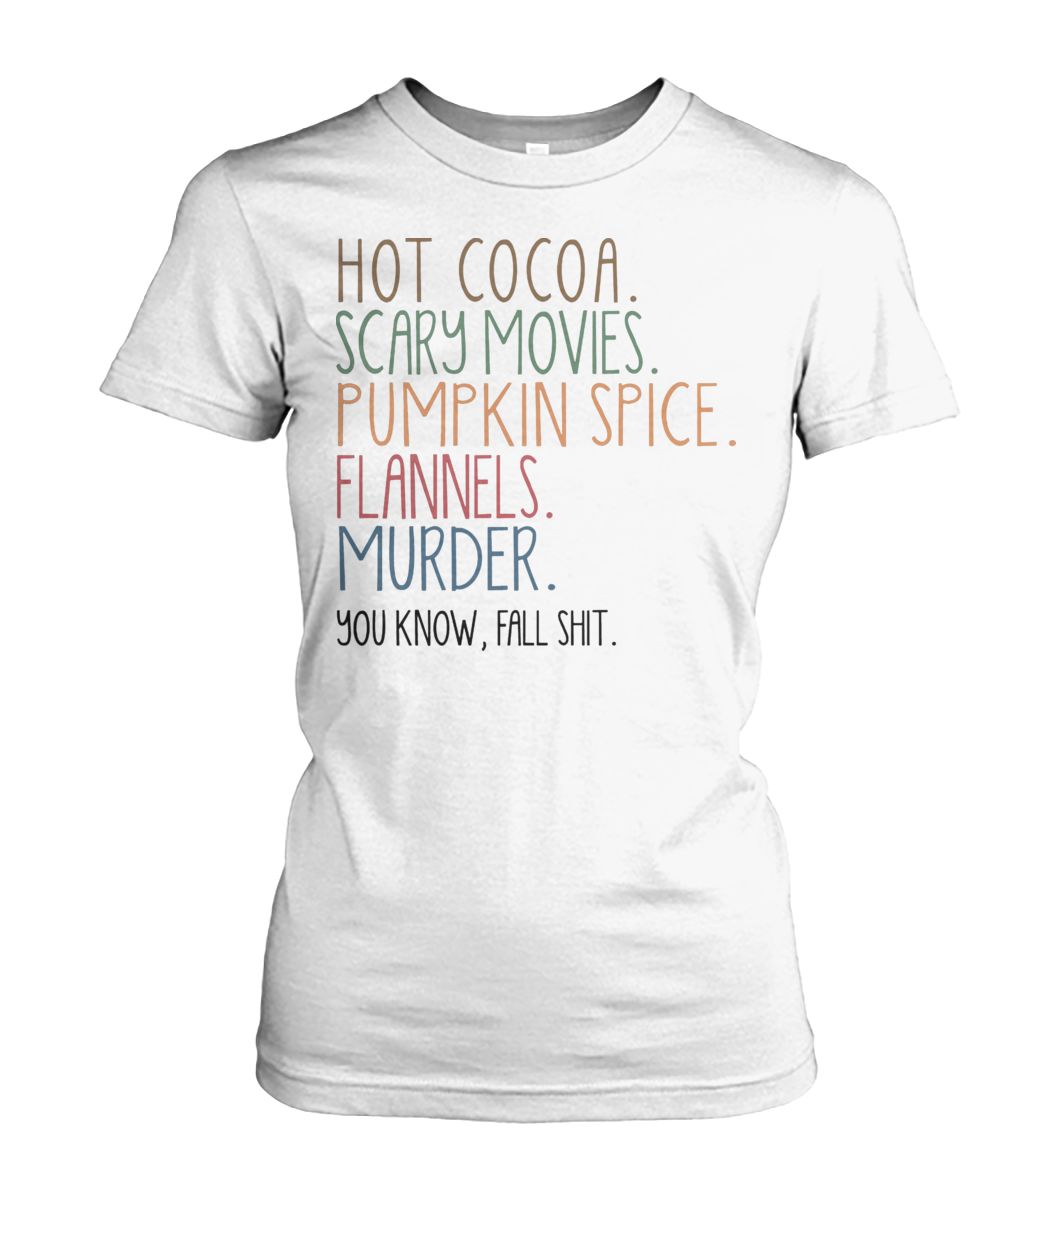 Hot cocoa scary movies pumpkin spice flannels murder you know fal shit women's crew tee